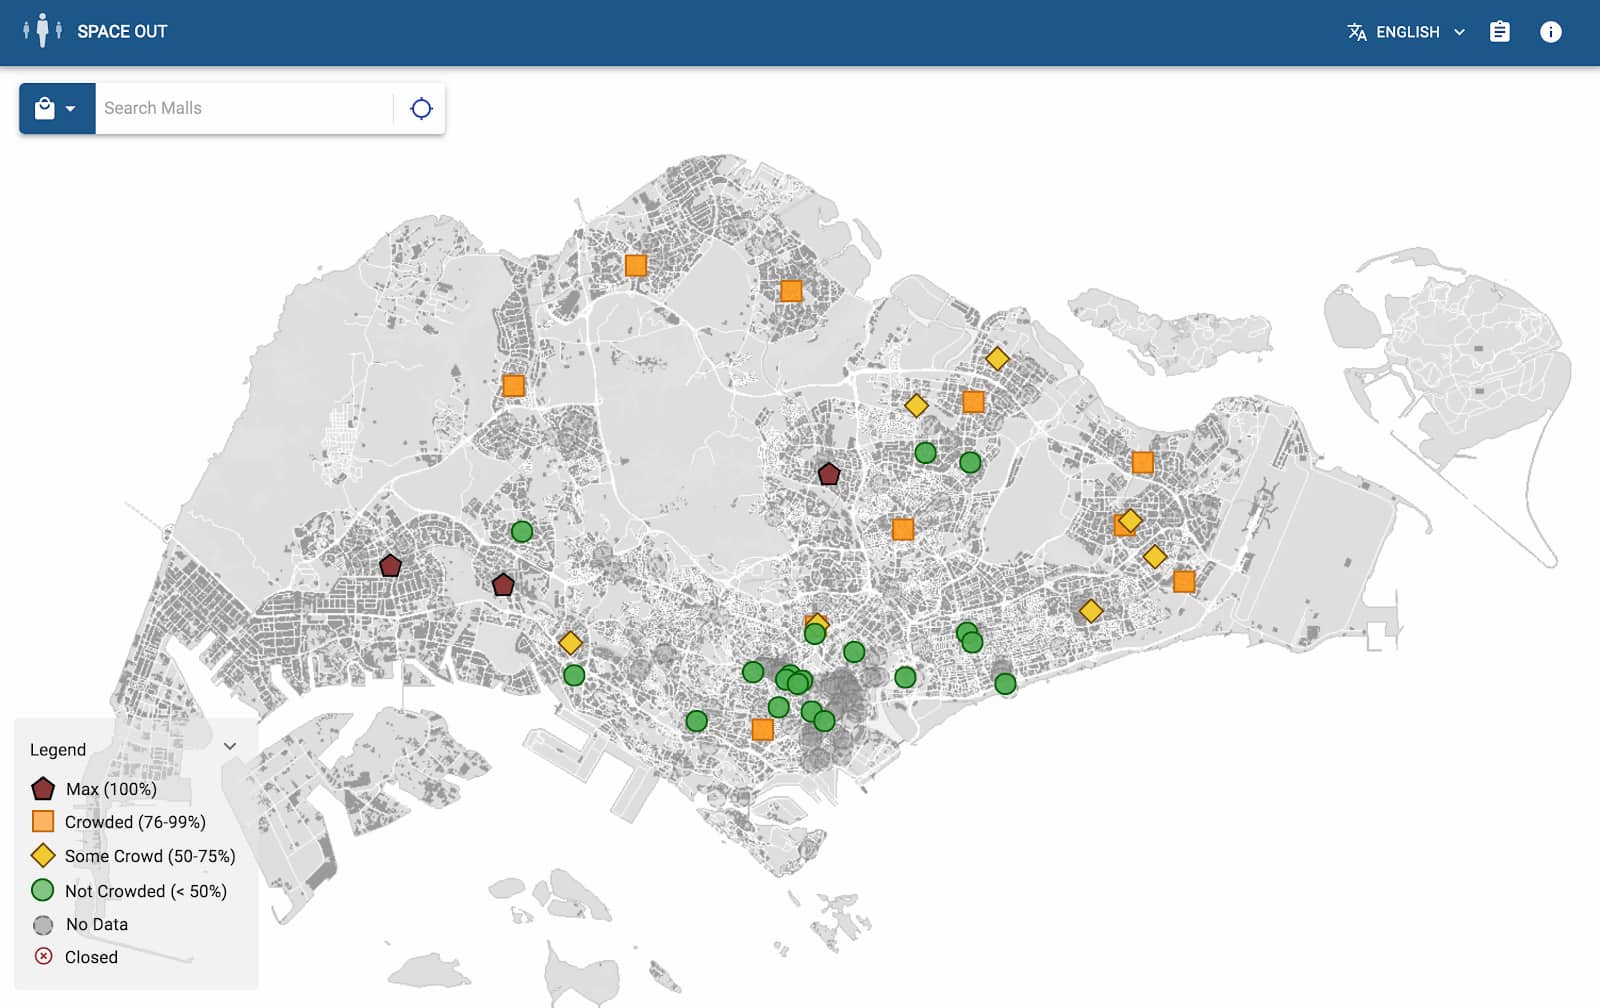 A snapshot of crowd levels of participating malls across Singapore. Users can click on each symbol to check recent trends of crowd levels.